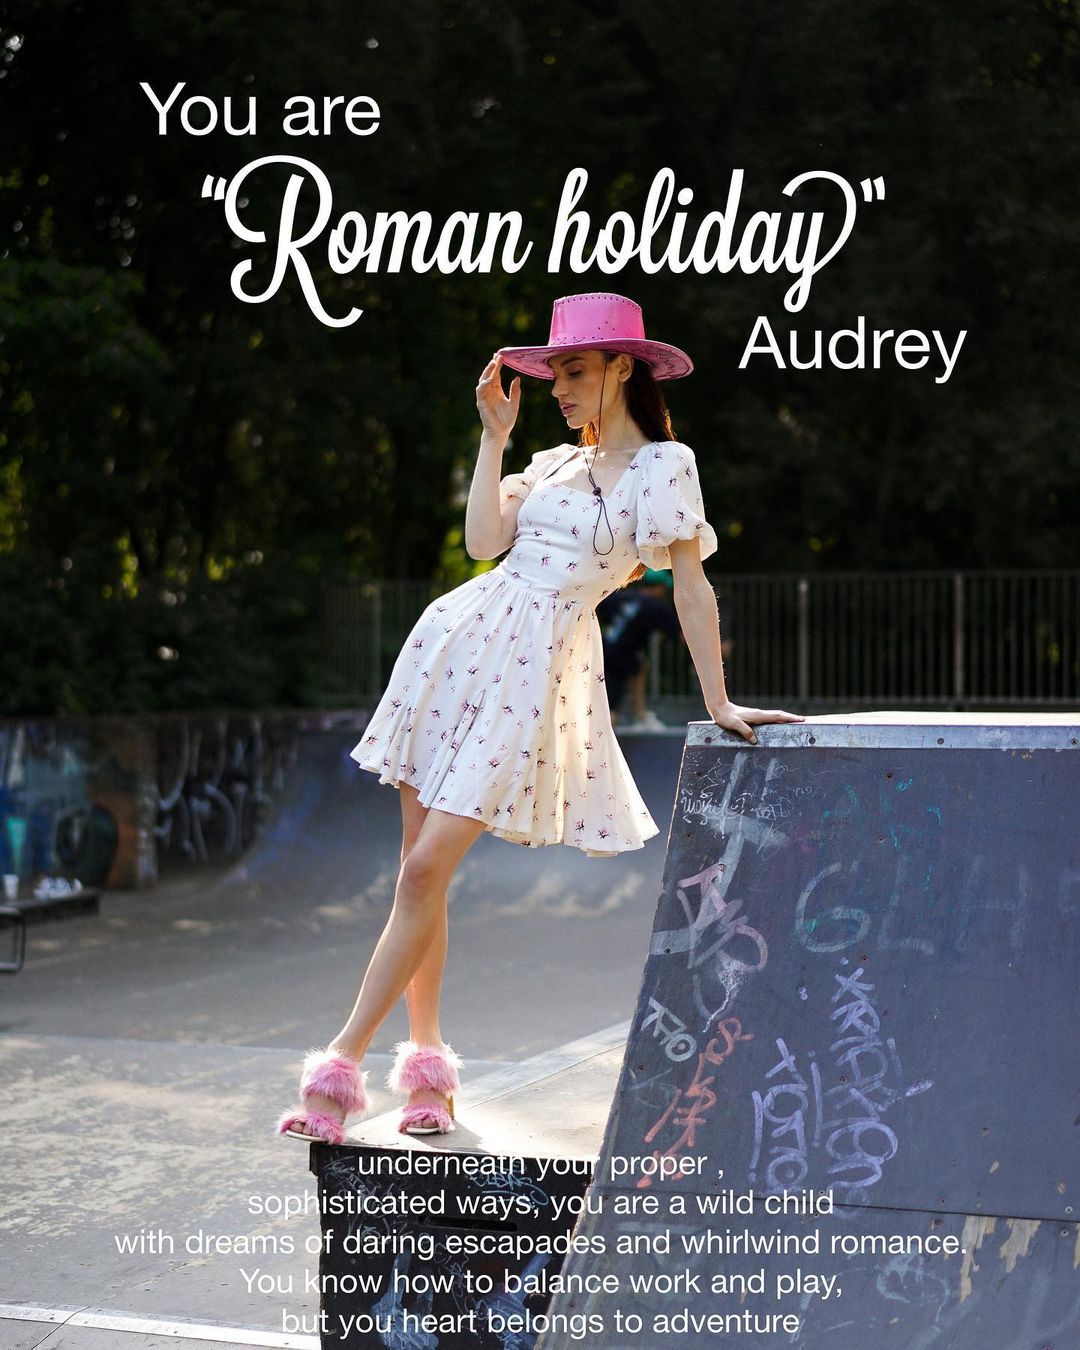 Photo by ALICE.K clothing on August 02, 2022. May be an image of 1 person, child, standing and text that says 'You are Roman holiday" Audrey underneath your proper, sophisticated ways, you are wild child with dreams of daring escapades and whirlwind romance. You know how to balance work and olay, but you heart belongs to adventure'.